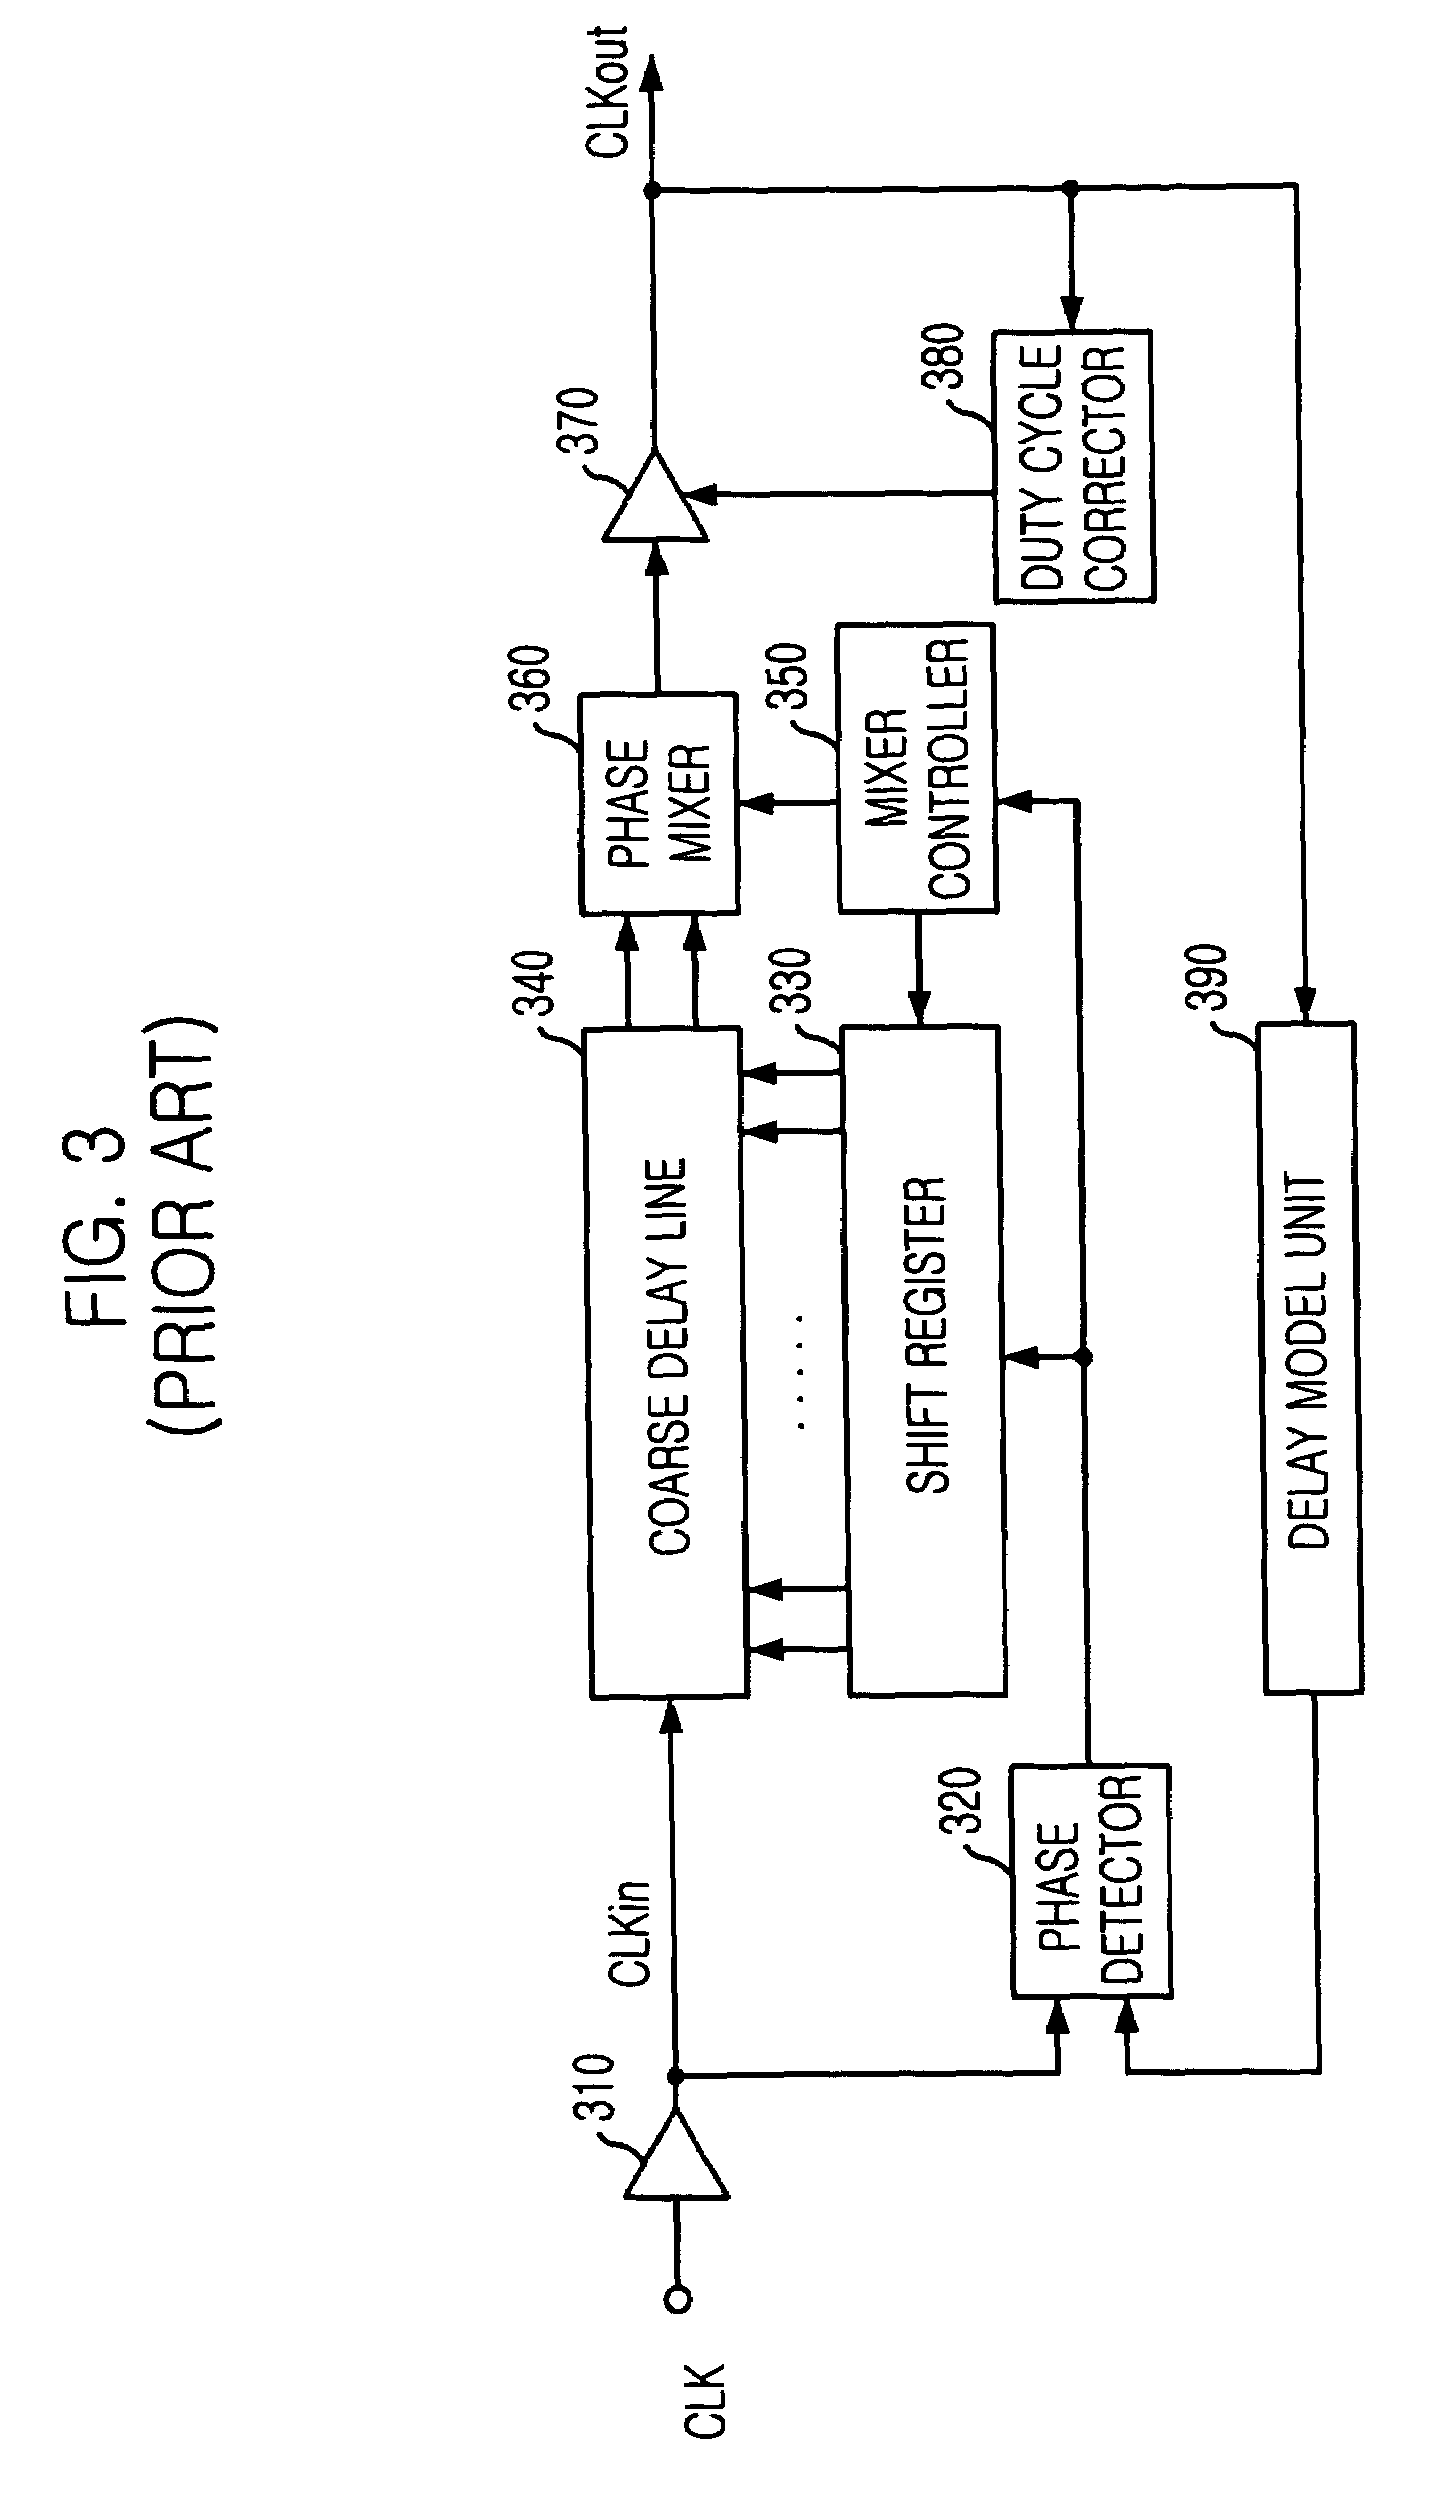 Register controlled delay locked loop and its control method